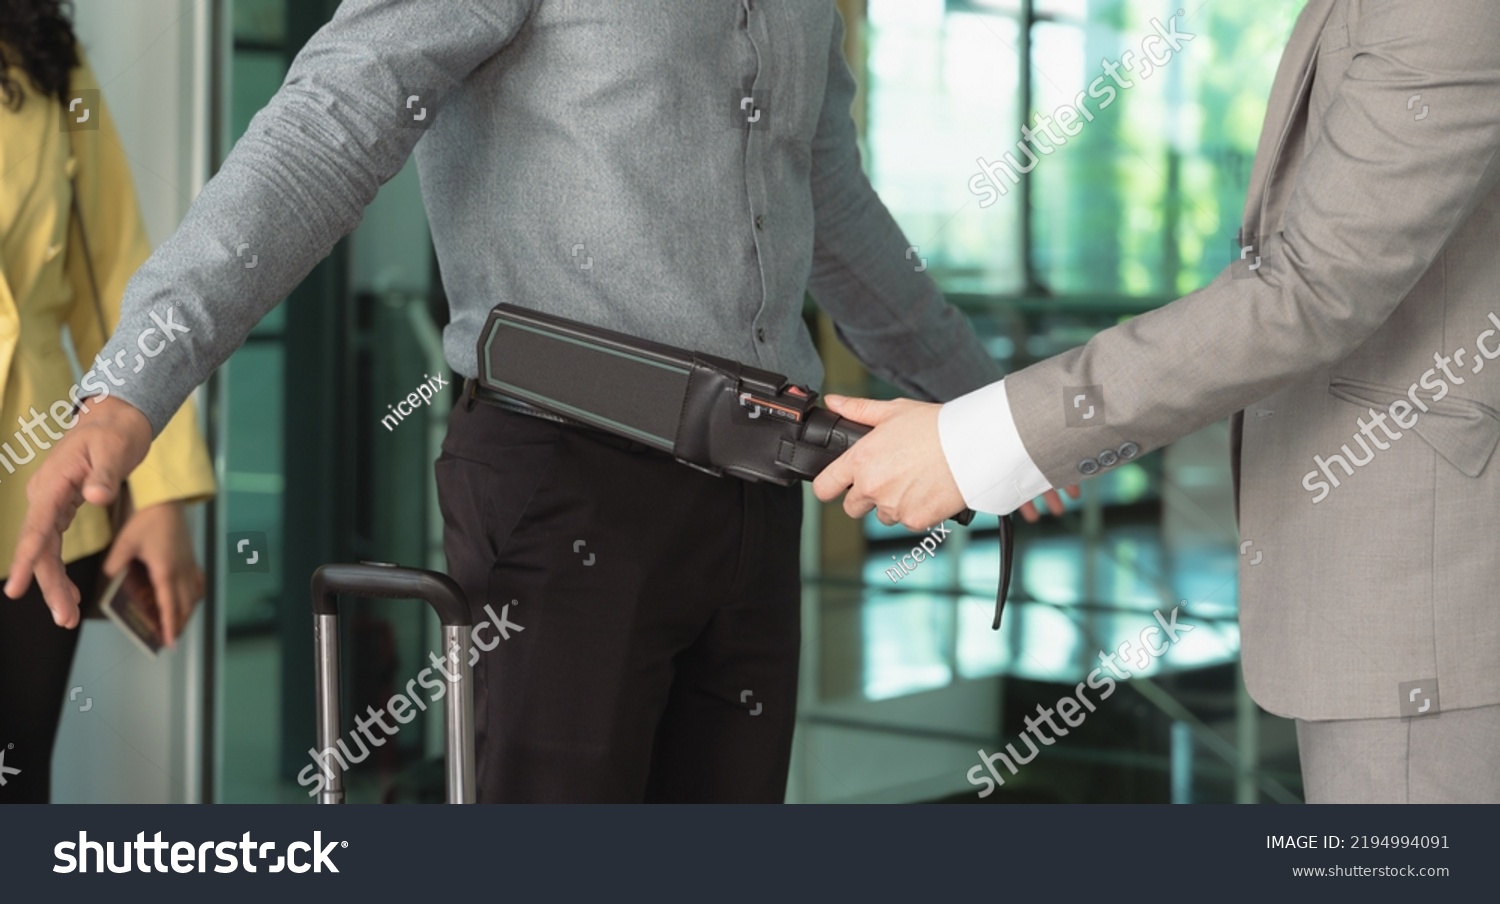 Security officer using a metal detector on a male passenger at airport boarding gate #2194994091